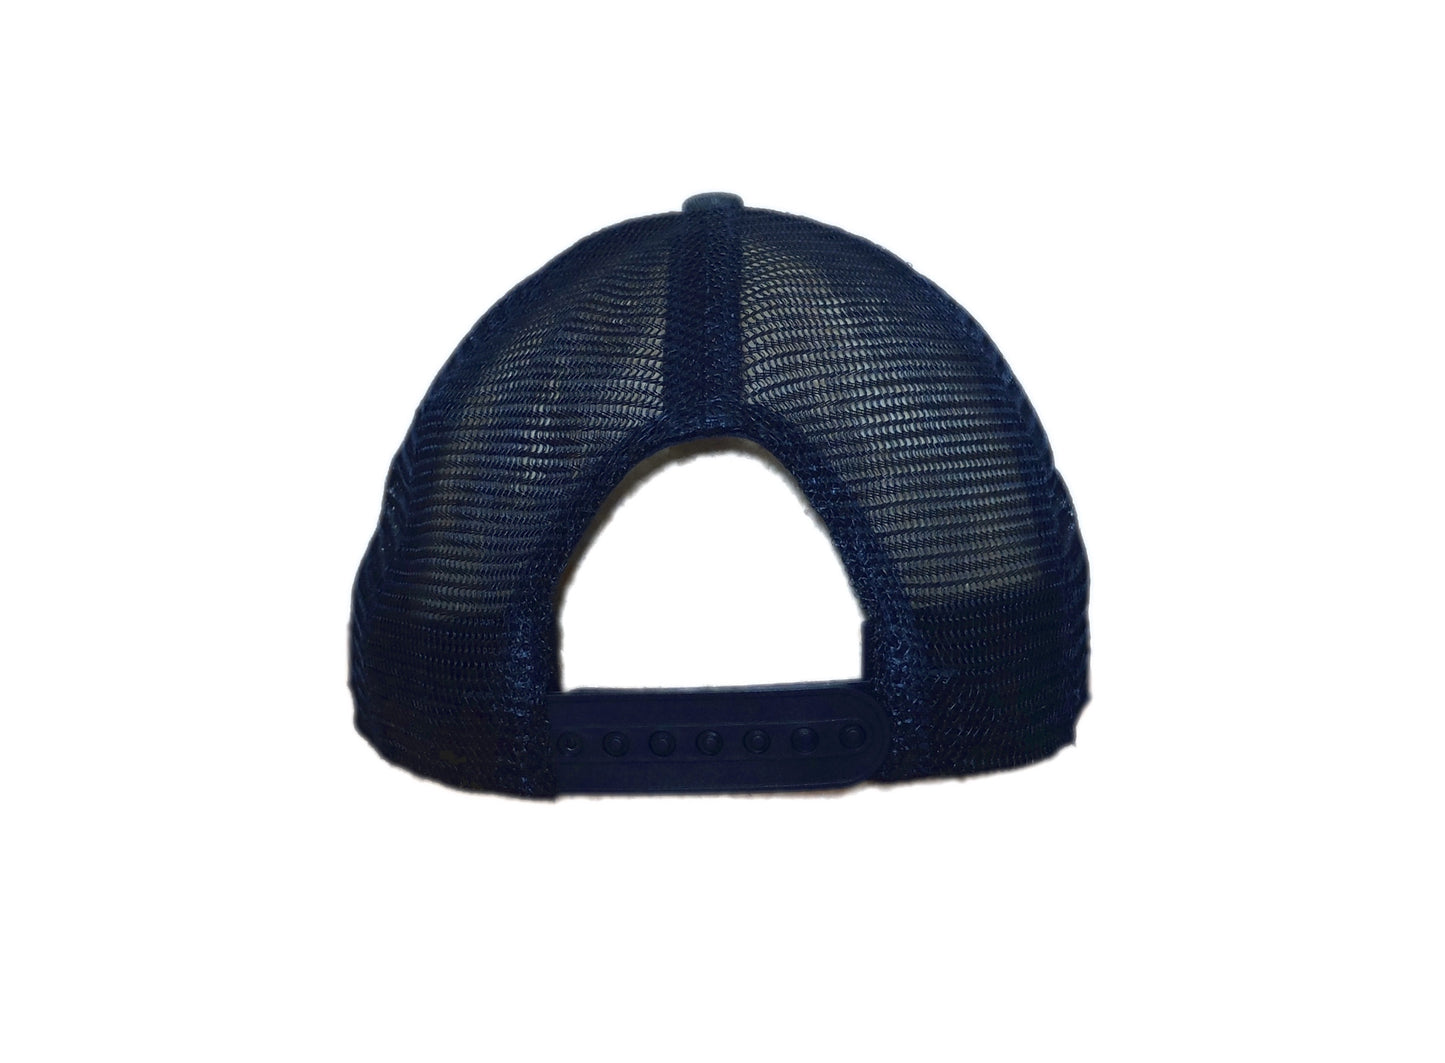 back view of grey and navy blue fisherman logo trucker hat